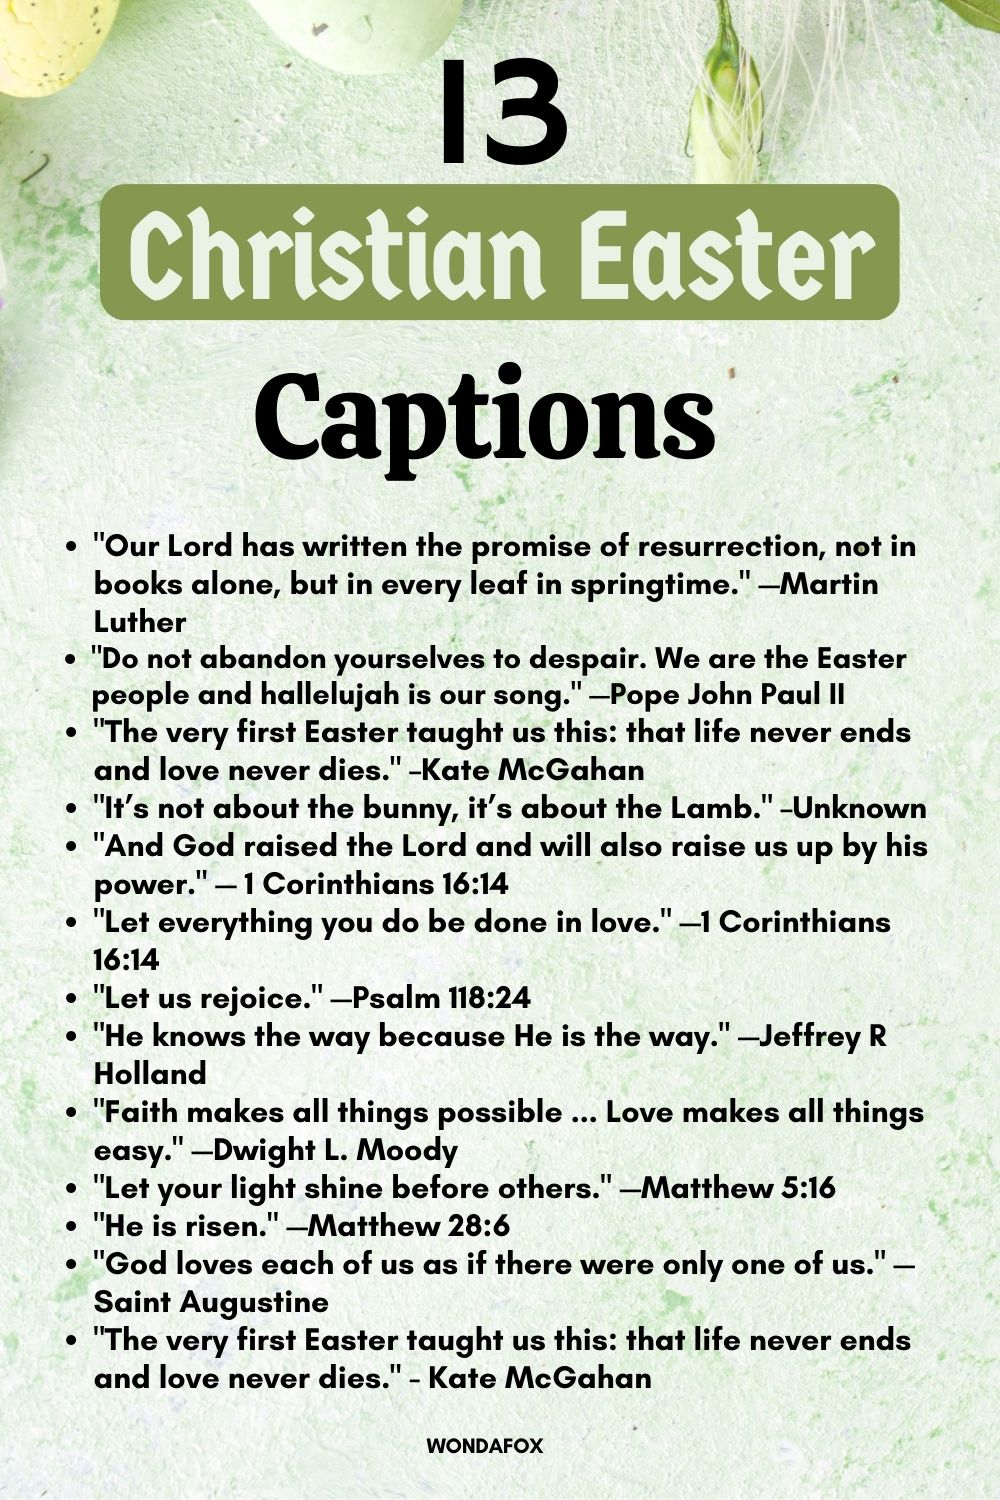 Christian Easter Captions